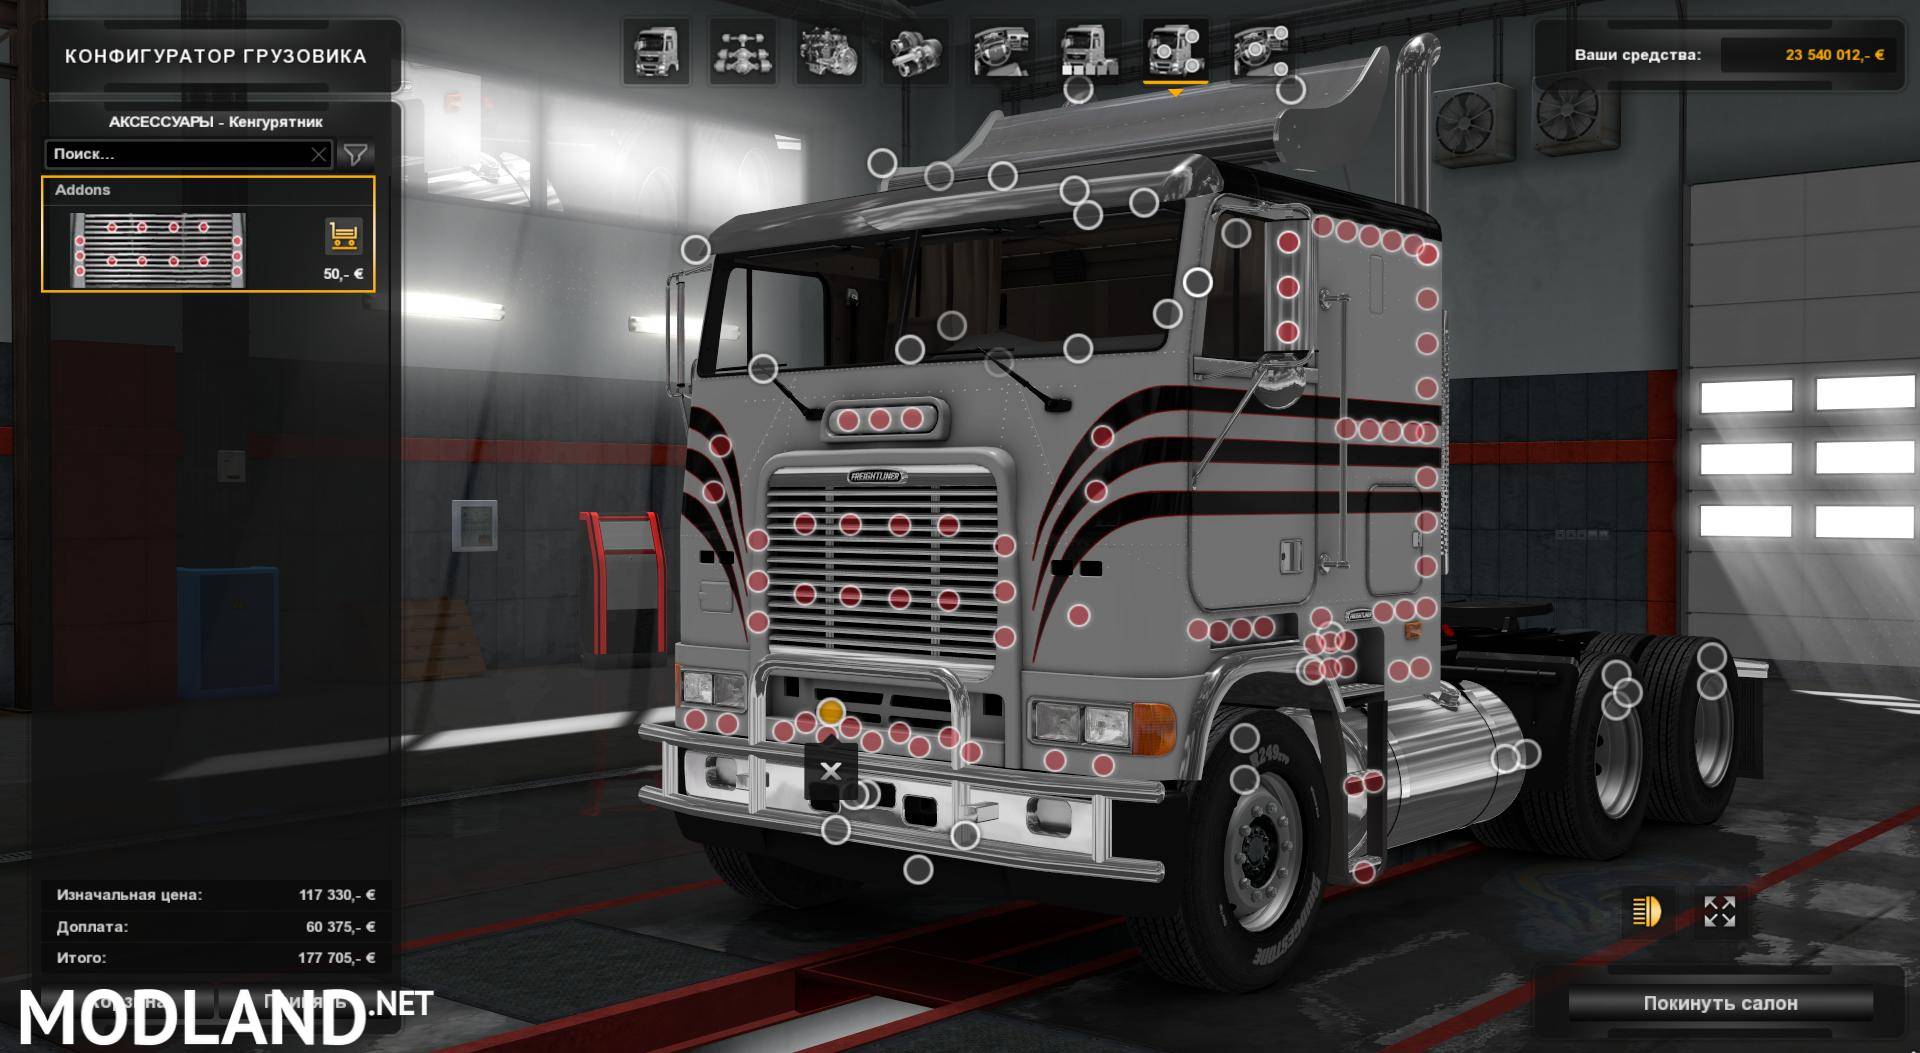 Volvo FMX 540 for 1.30 UPDATED - ETS 2